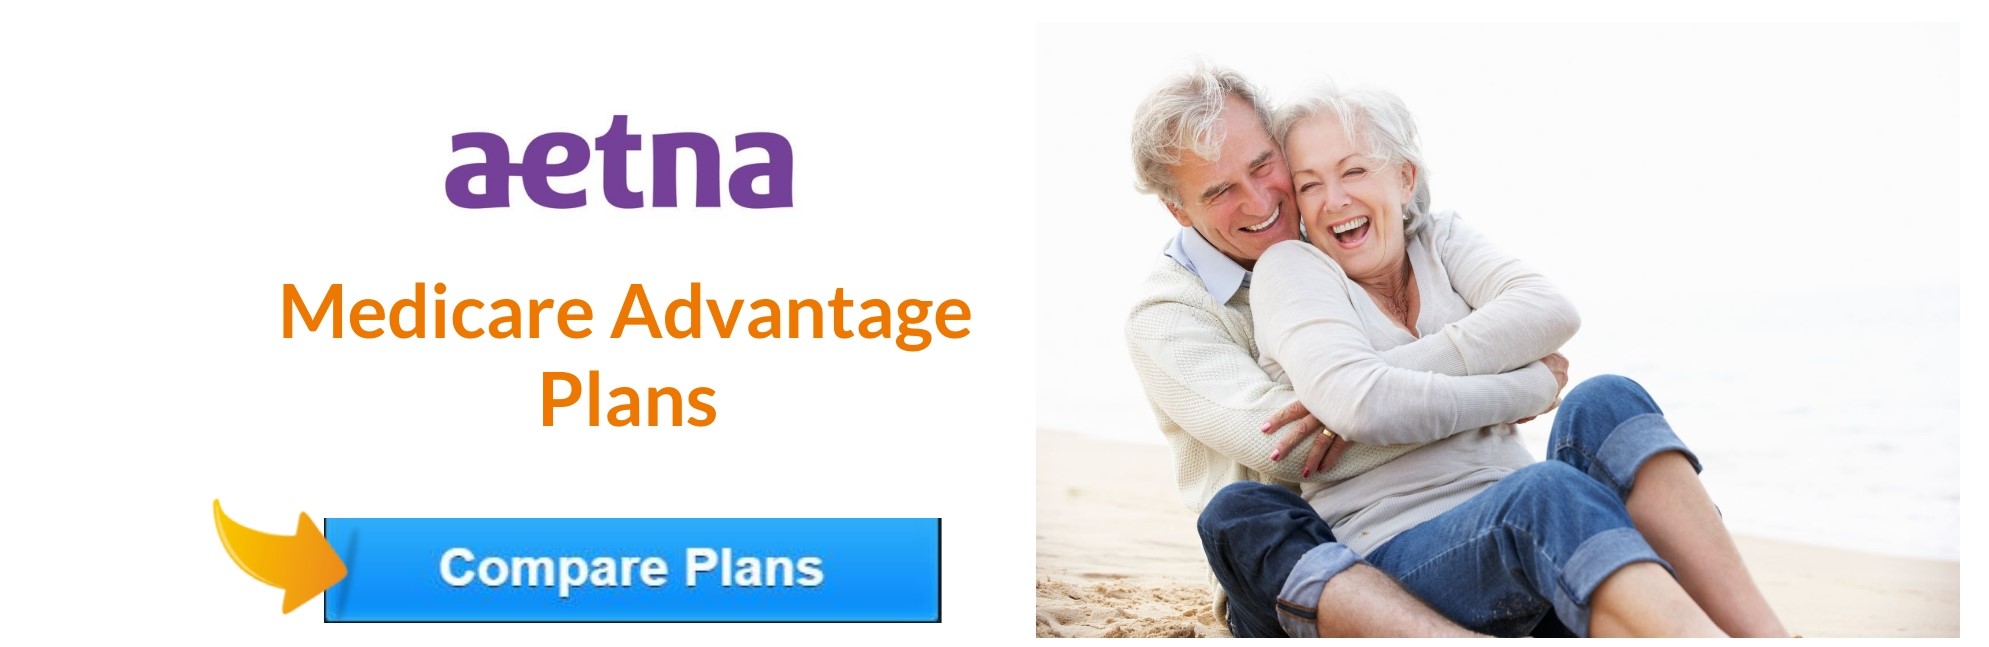 aetna timely filing 2021